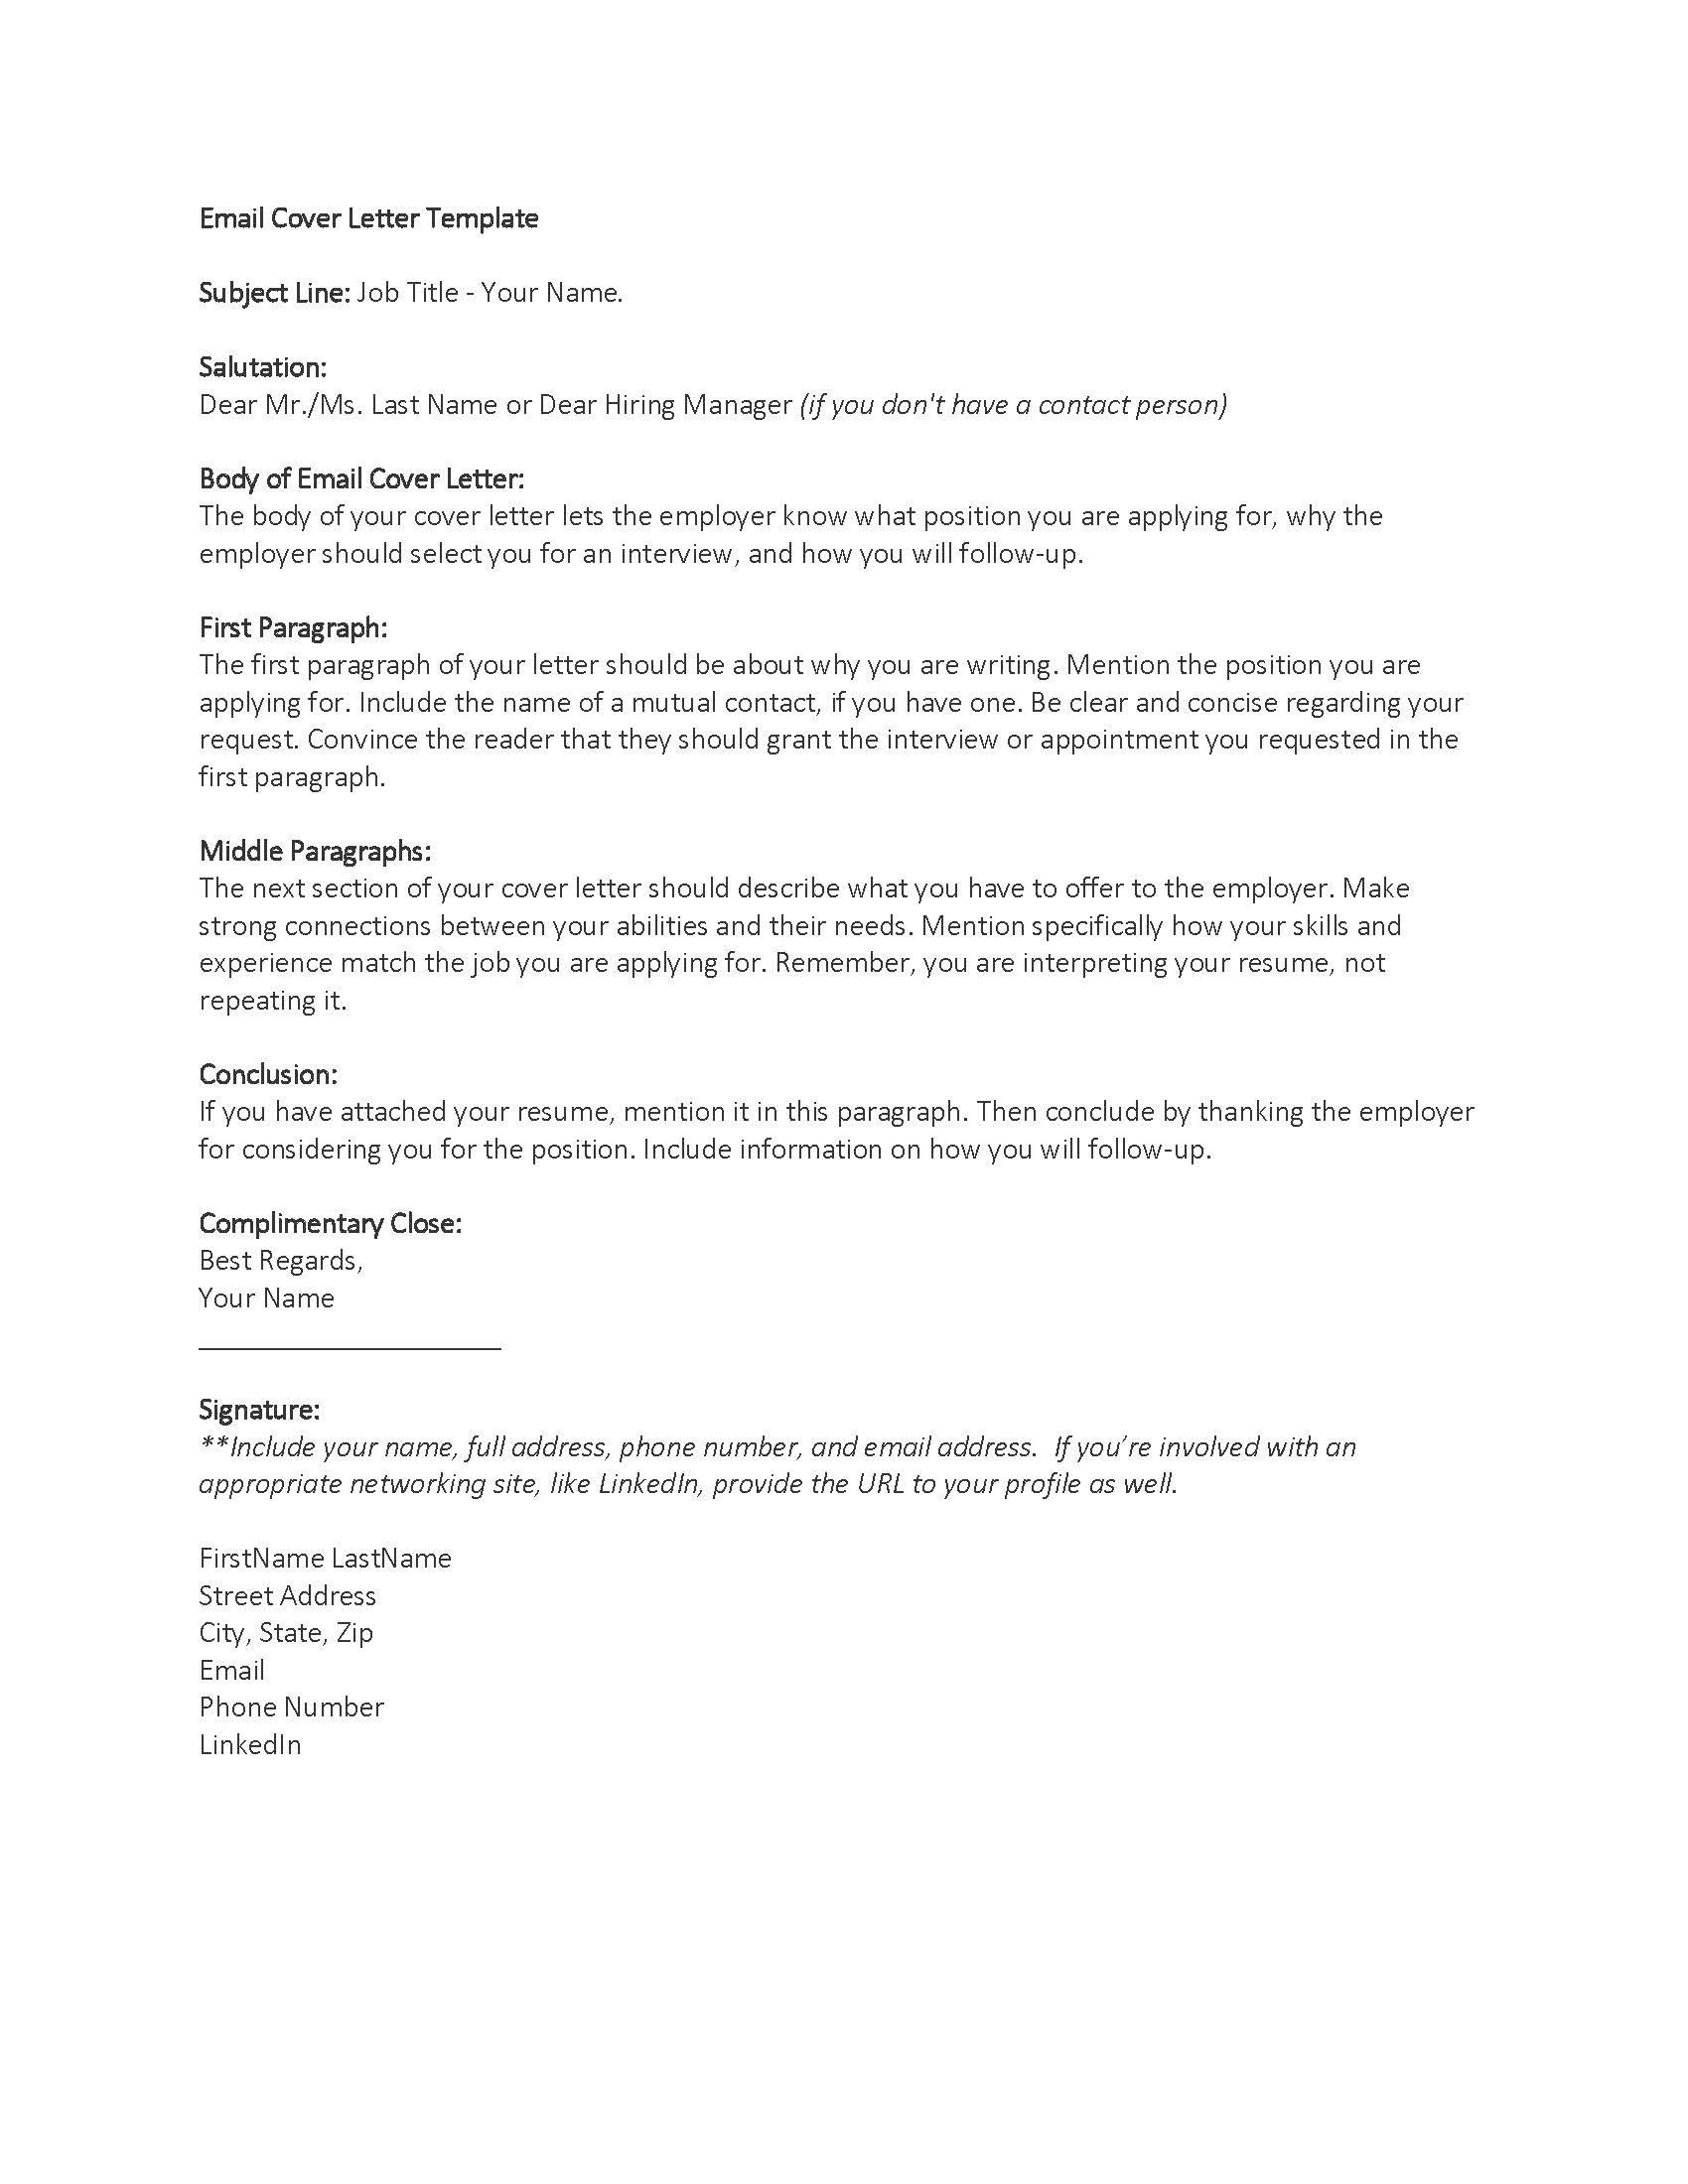 cover letter template email